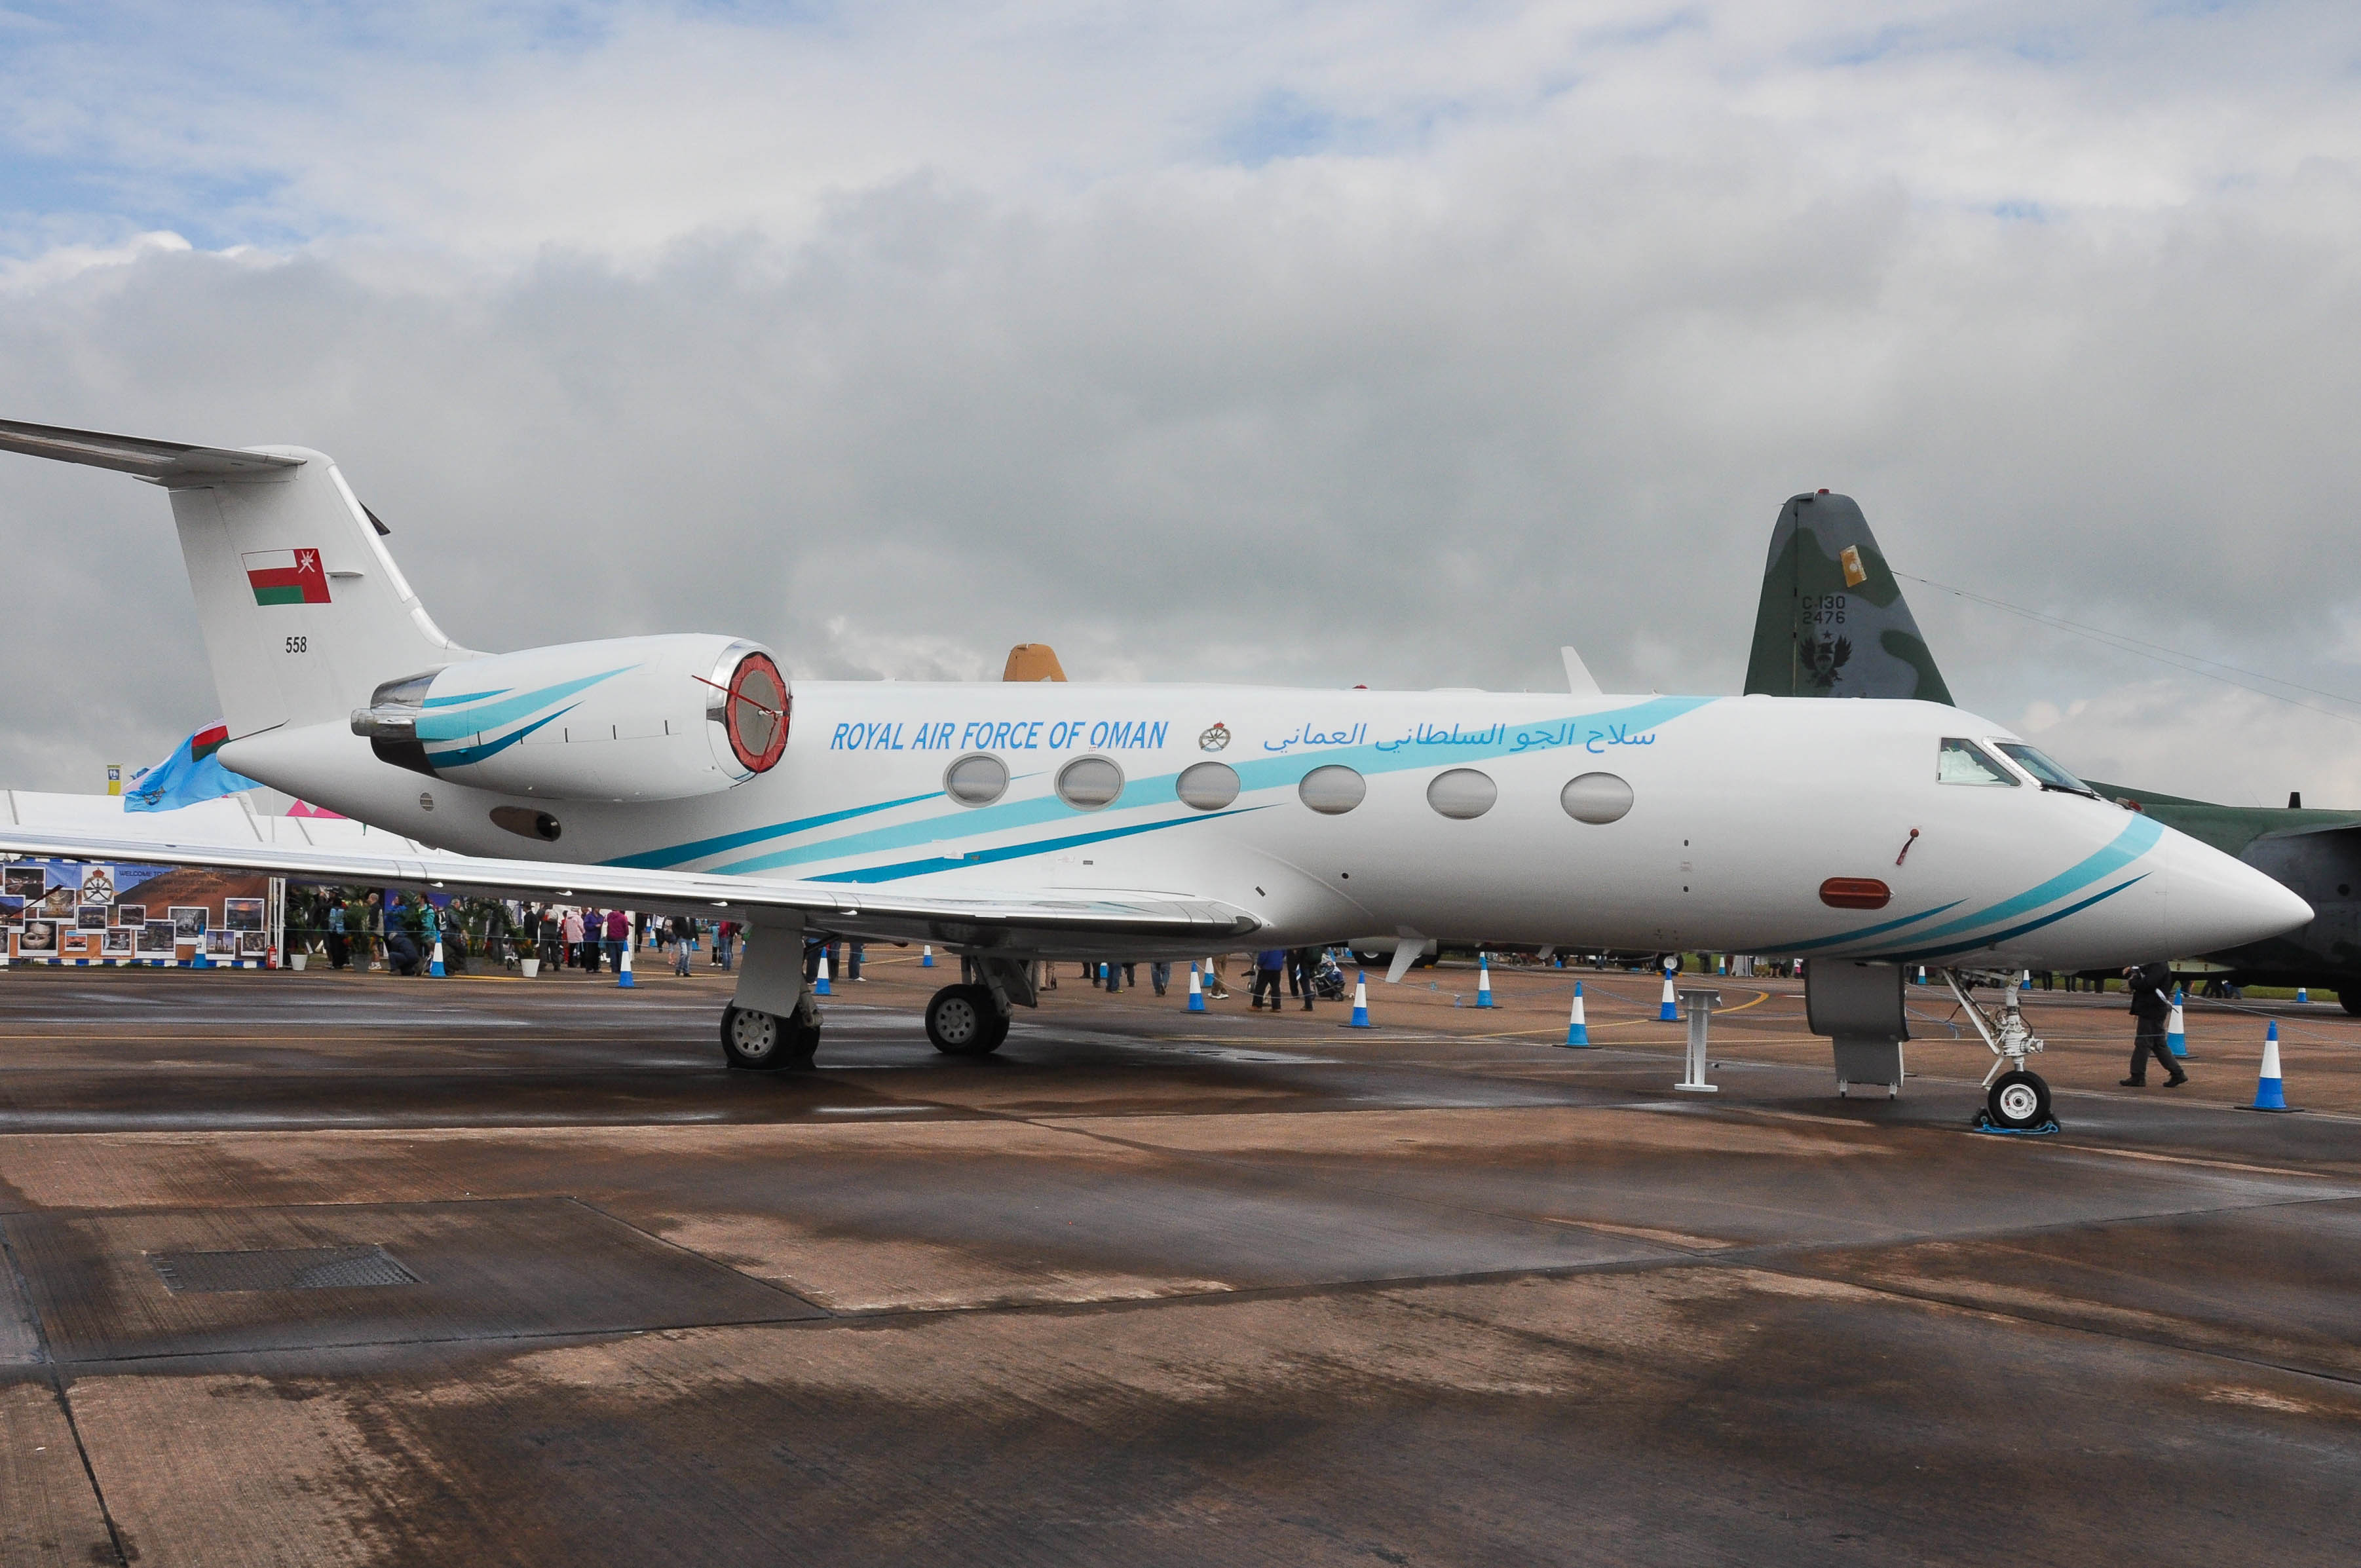 558/558 Royal Air Force of Oman Gulfstream IV Airframe Information - AVSpotters.com